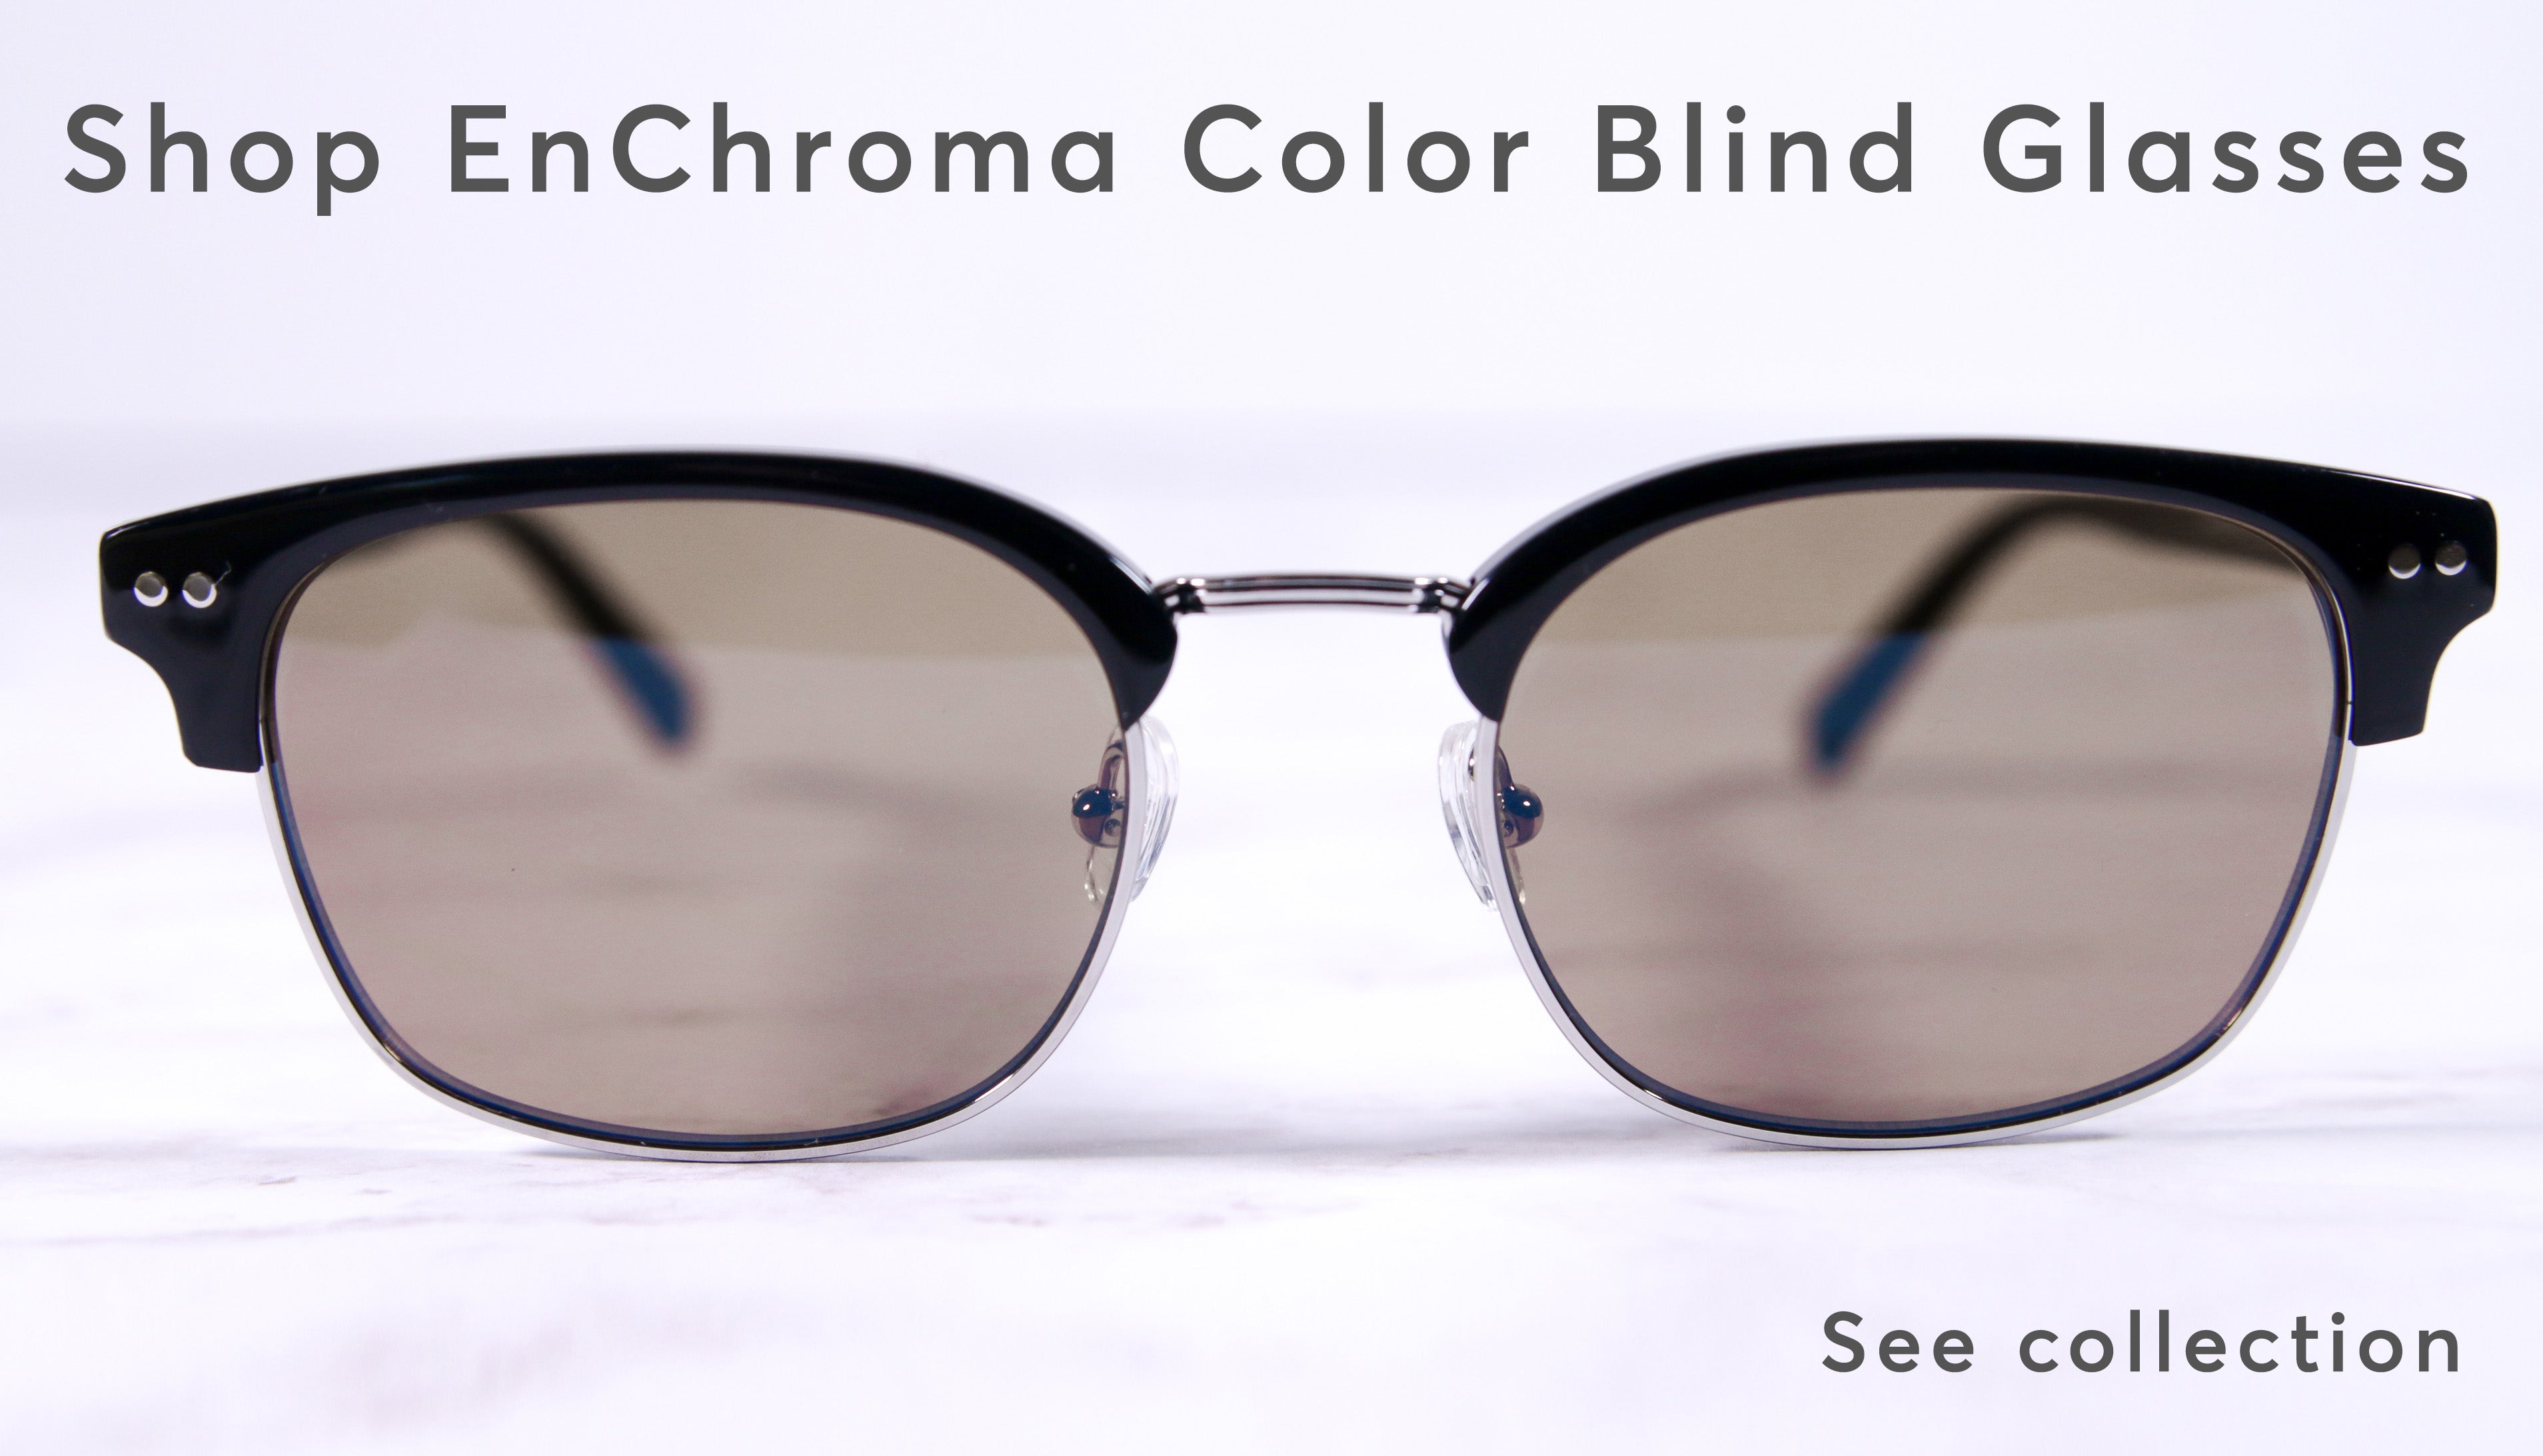 Shop EnChroma Collections